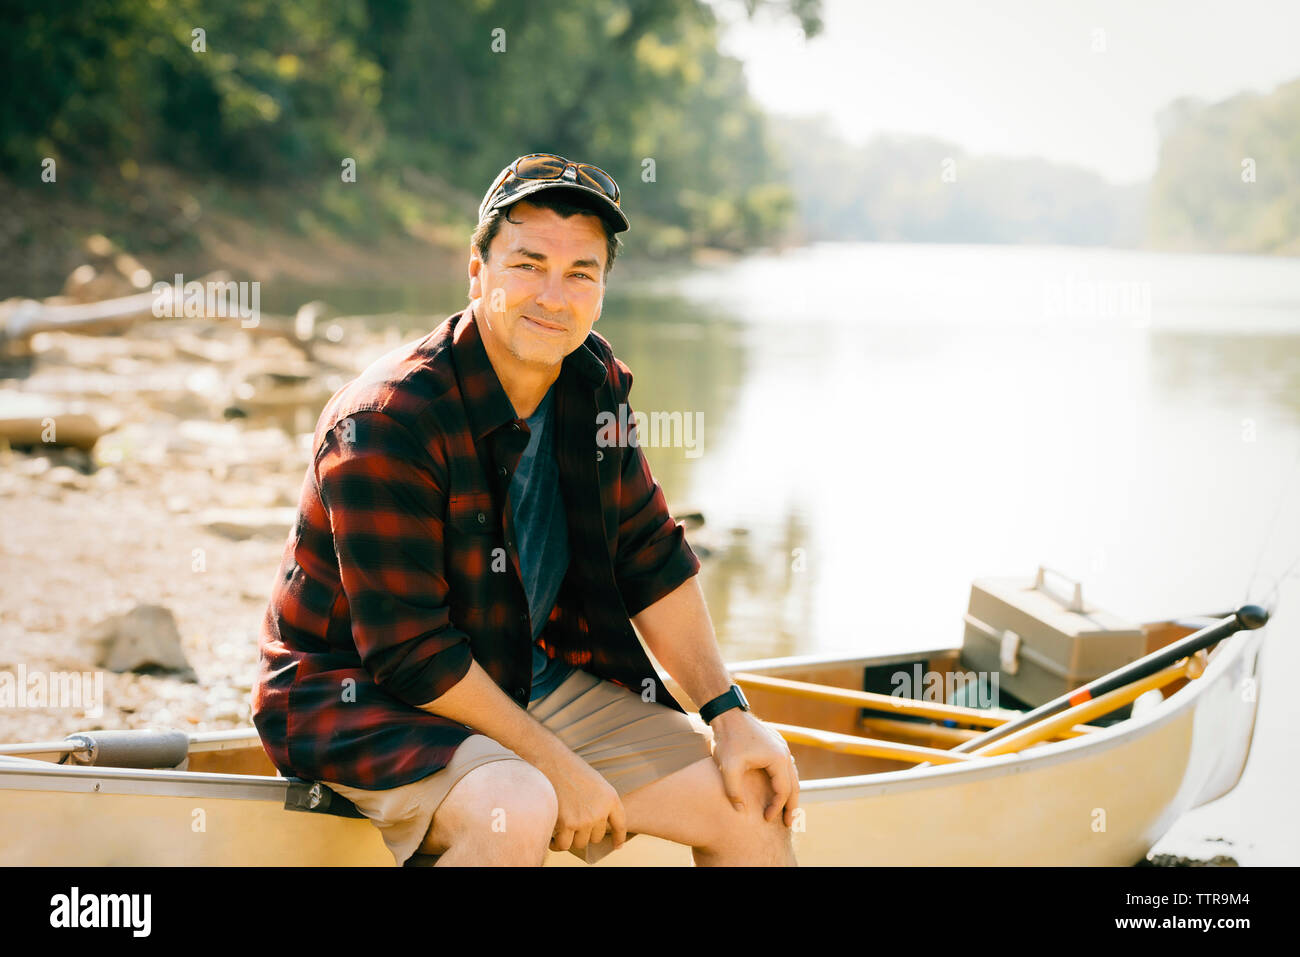 Portrait of mid adult man sitting on boat at lakeshore Banque D'Images